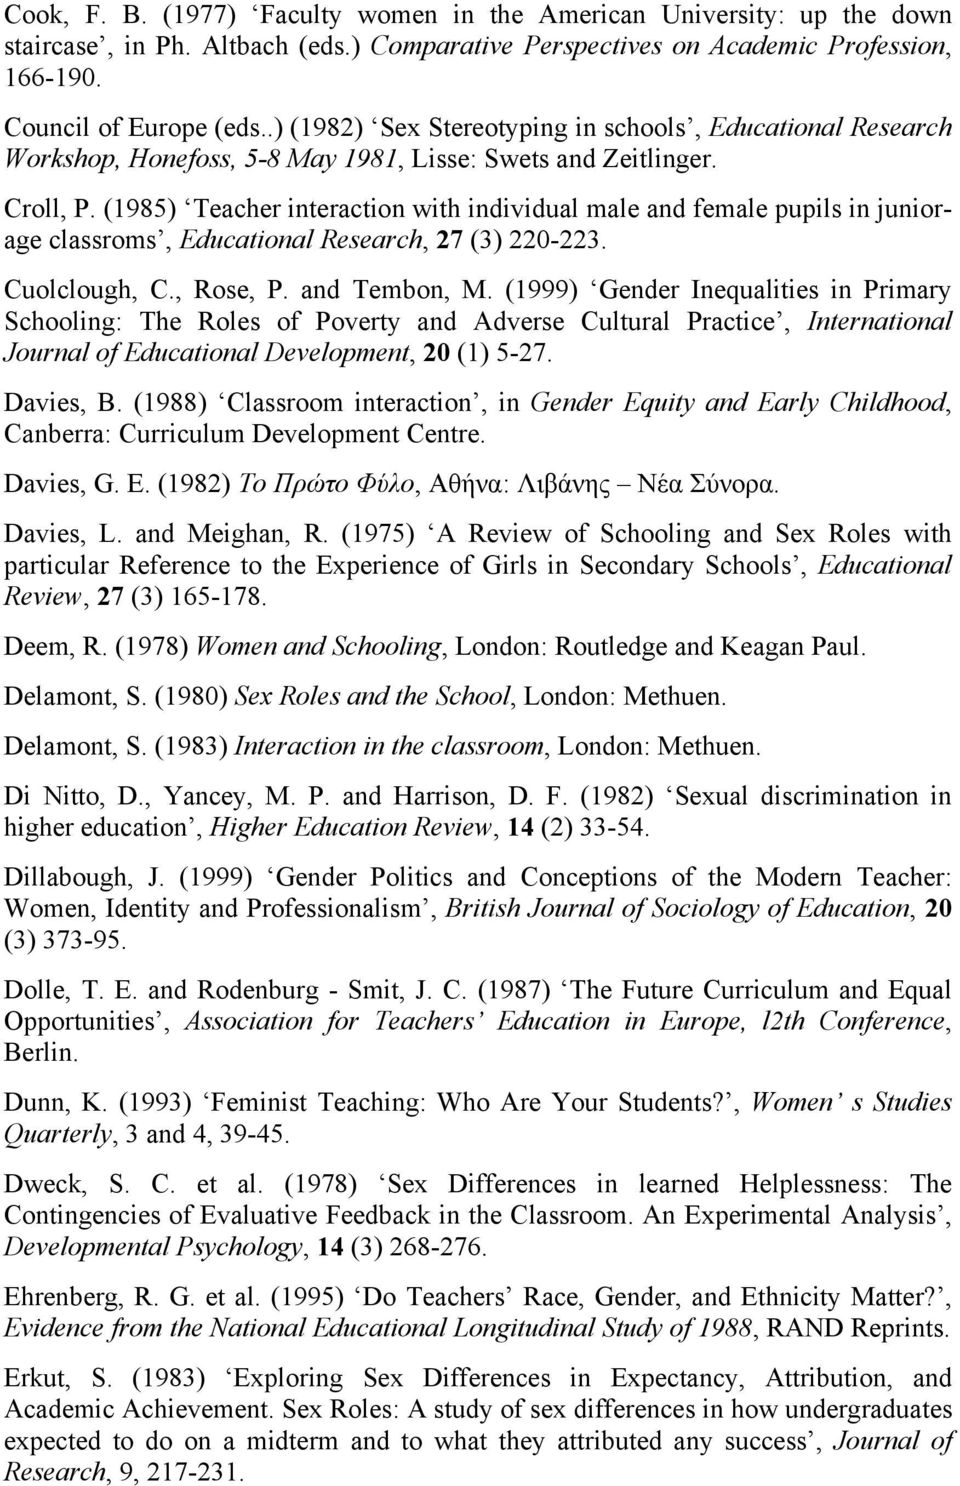 (1985) Teacher interaction with individual male and female pupils in juniorage classroms, Educational Research, 27 (3) 220-223. Cuolclough, C., Rose, P. and Tembon, M.